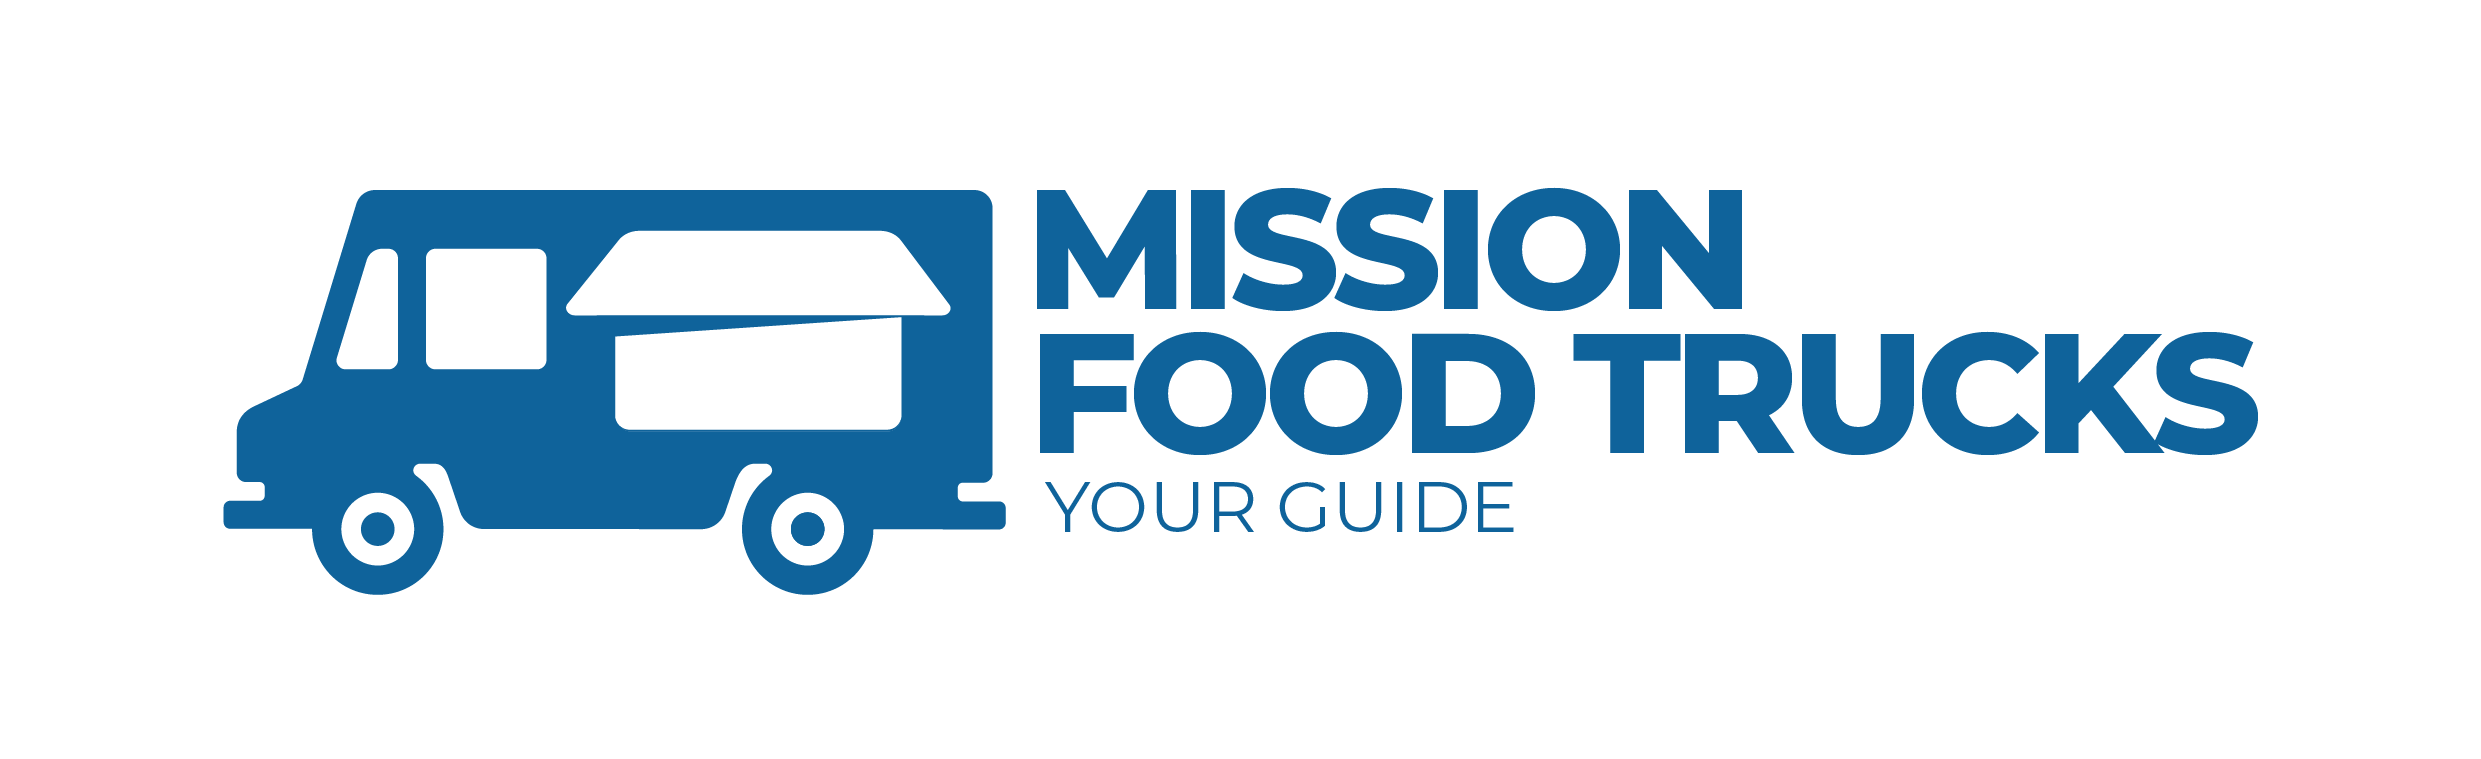 Mission Food Truck Guide